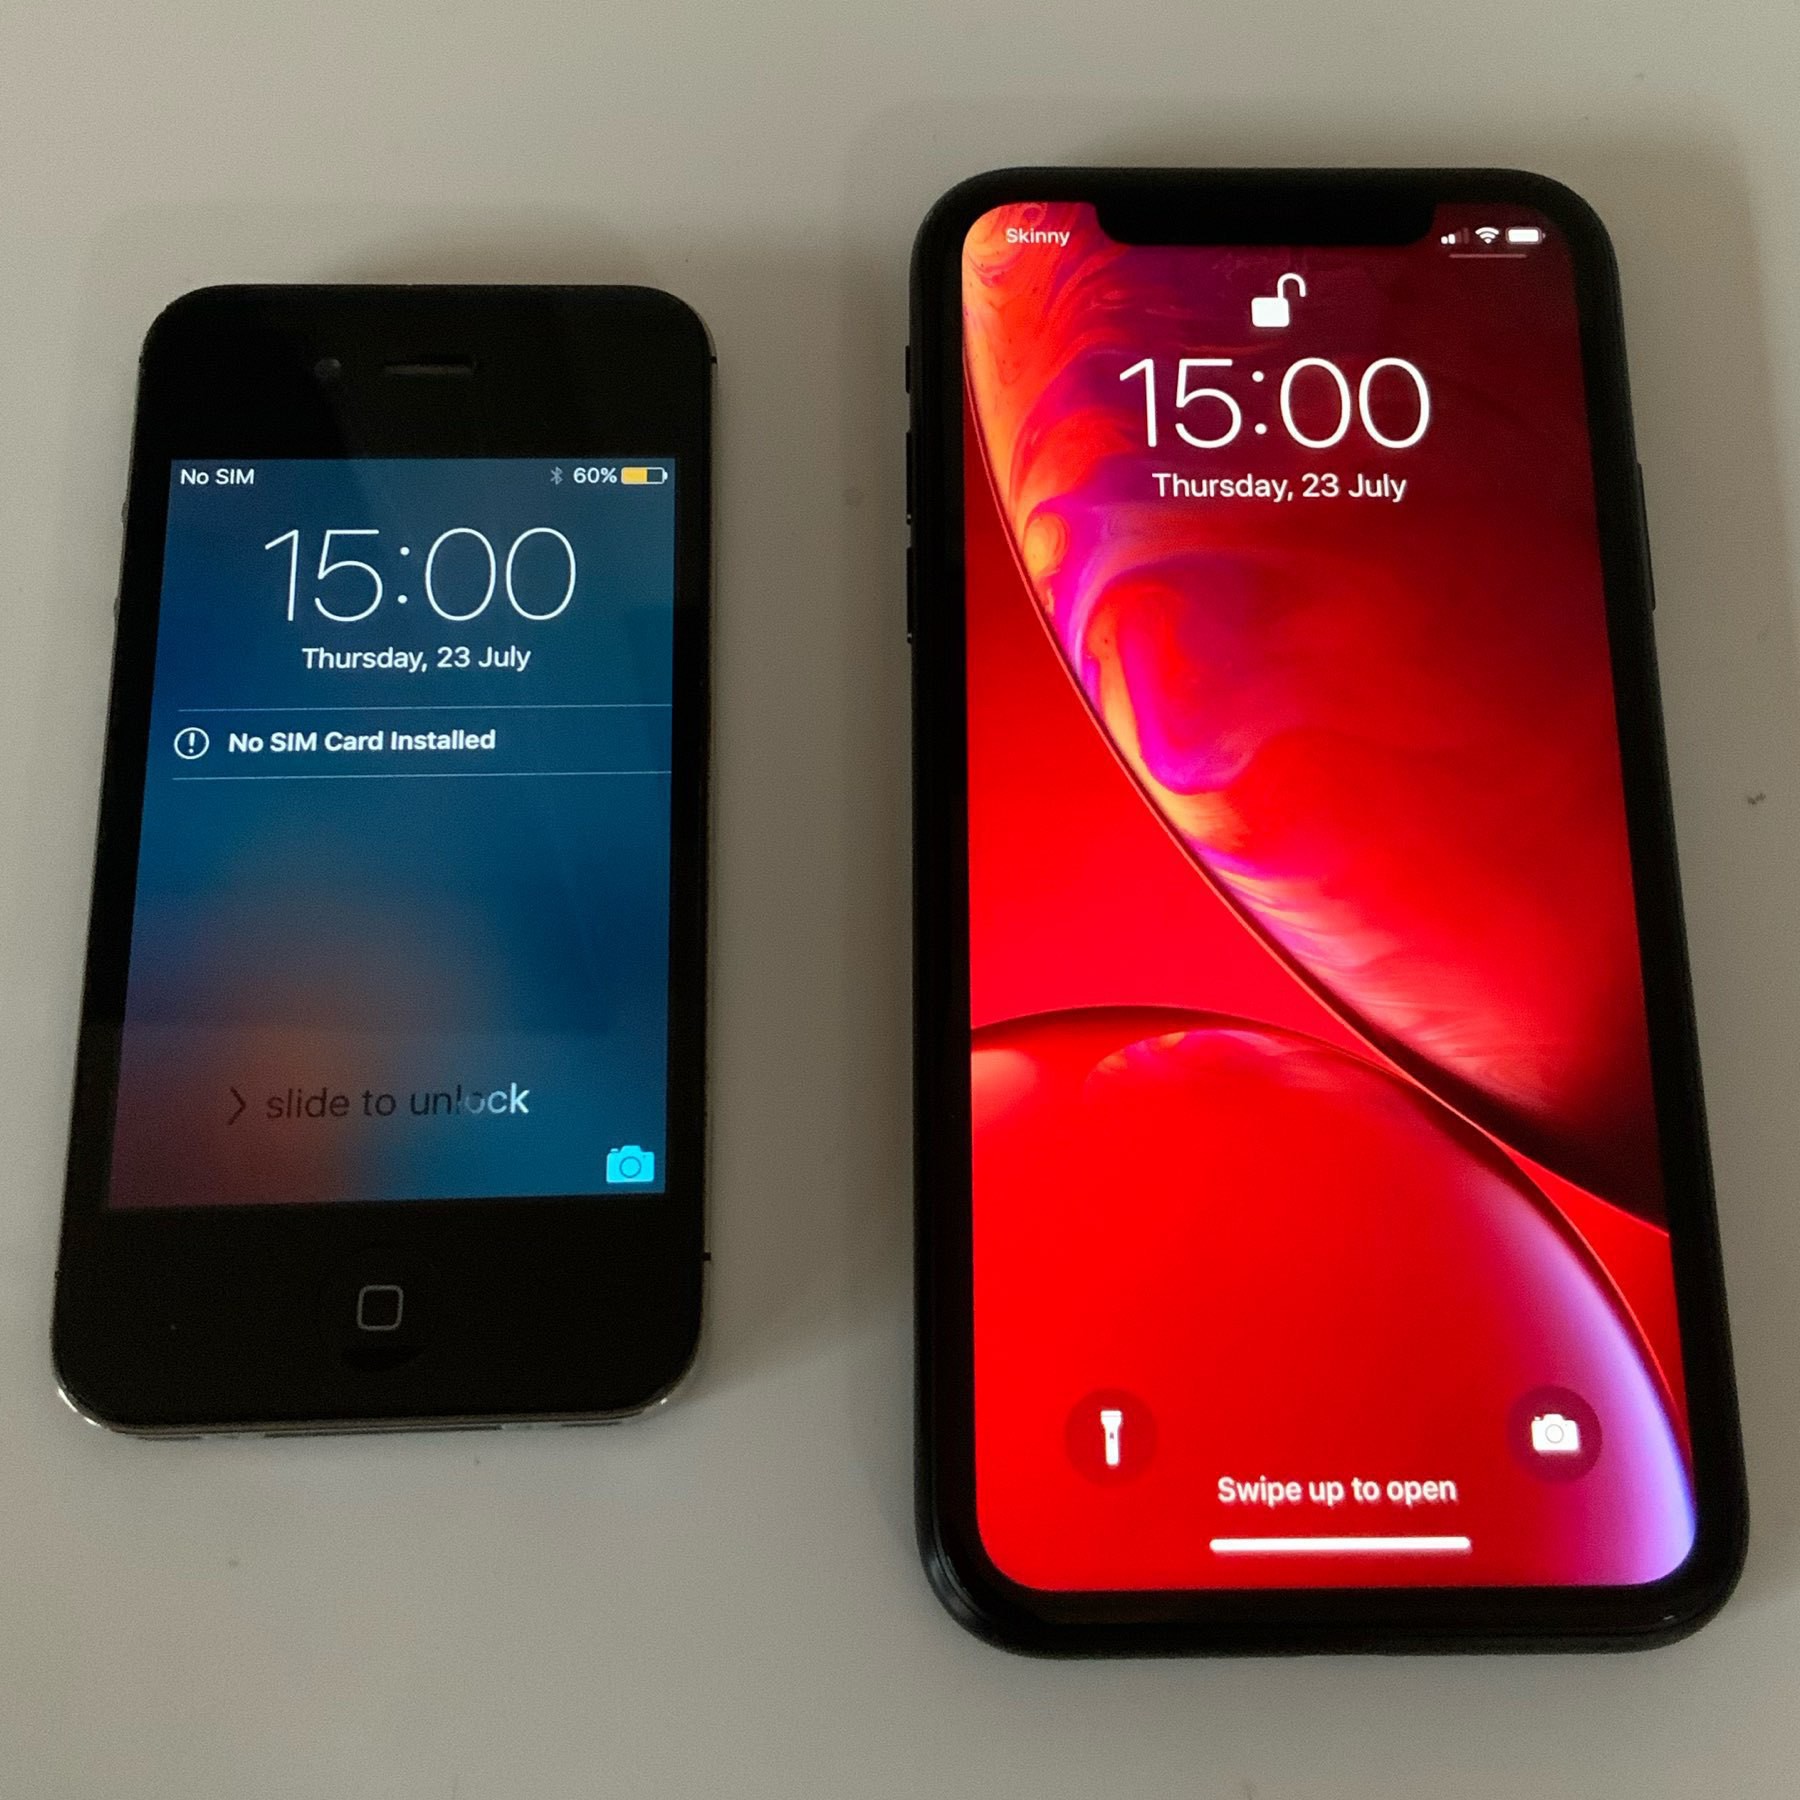 my fixed iphone XR next to my old iphone 4, which has been my carry phone for a few days